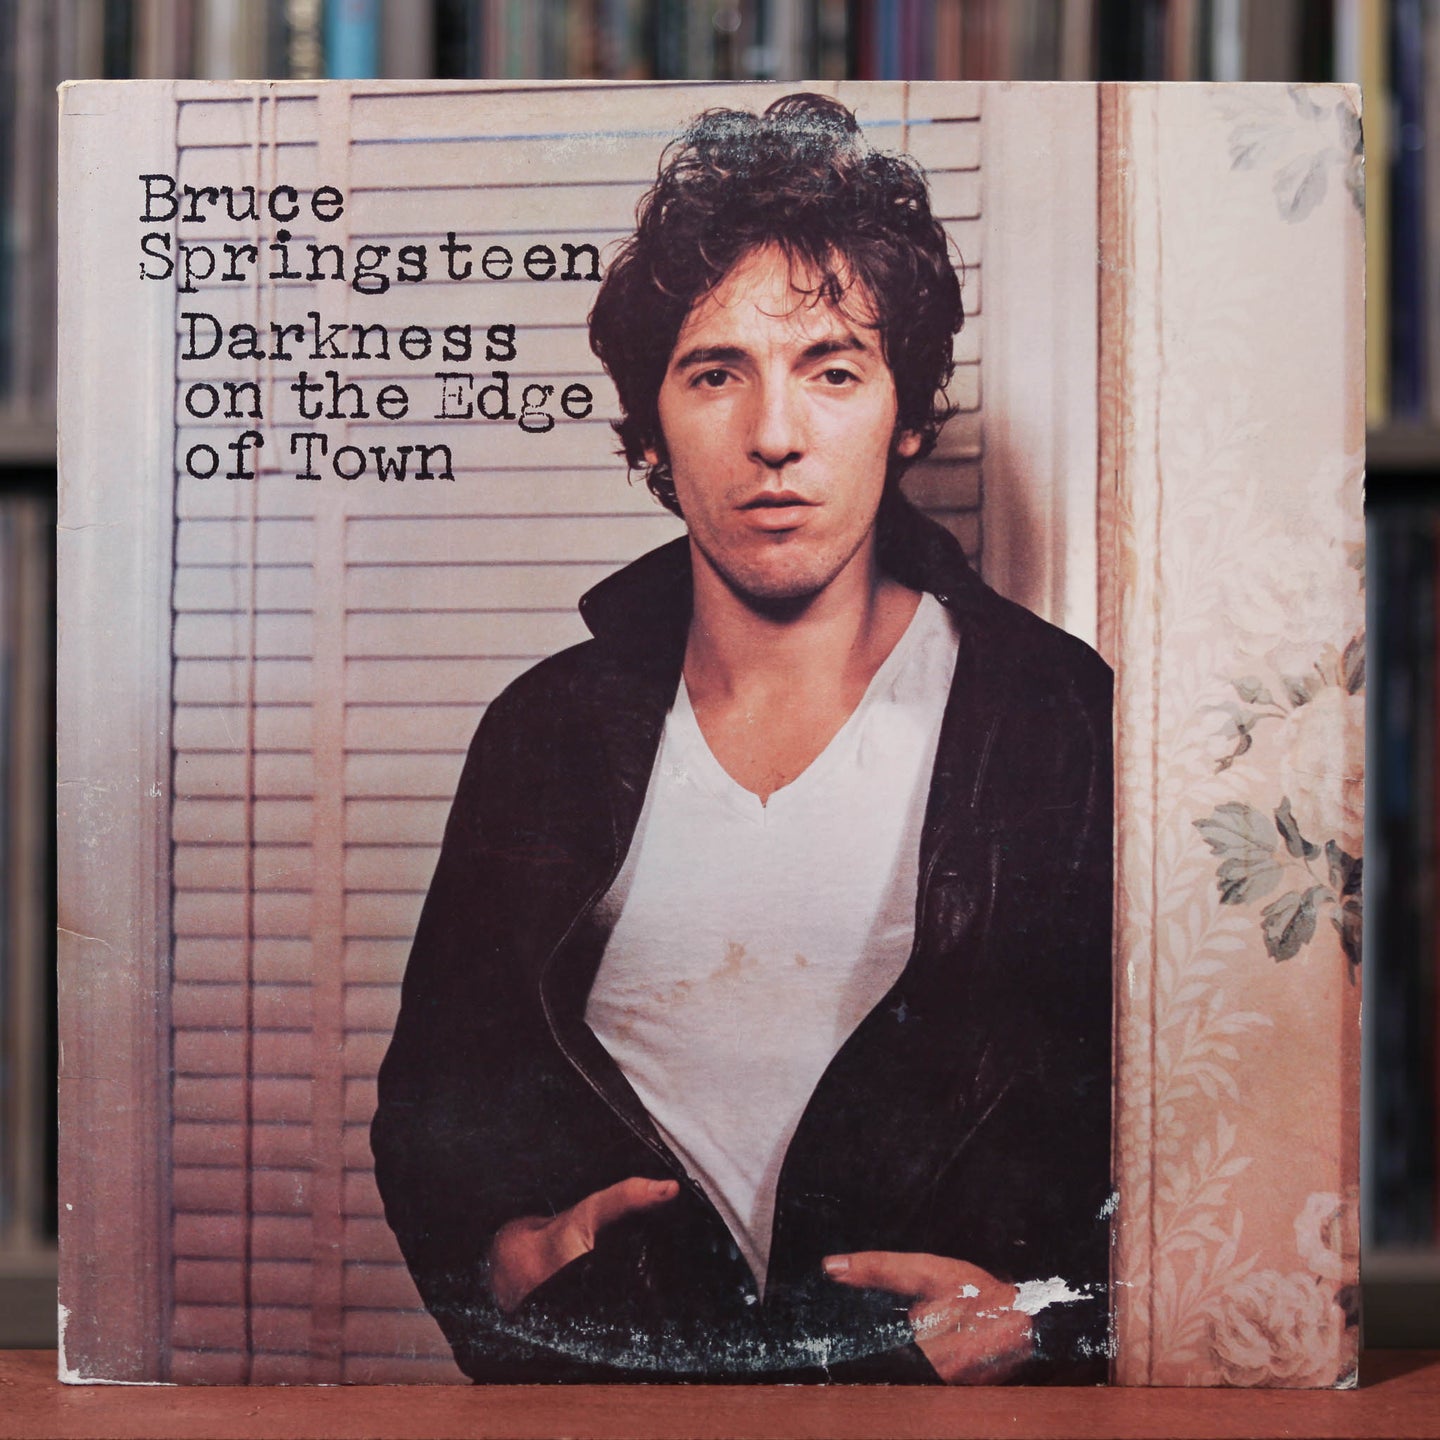 Bruce Springsteen - Darkness On The Edge Of Town. - 1978  Columbia, VG/VG+